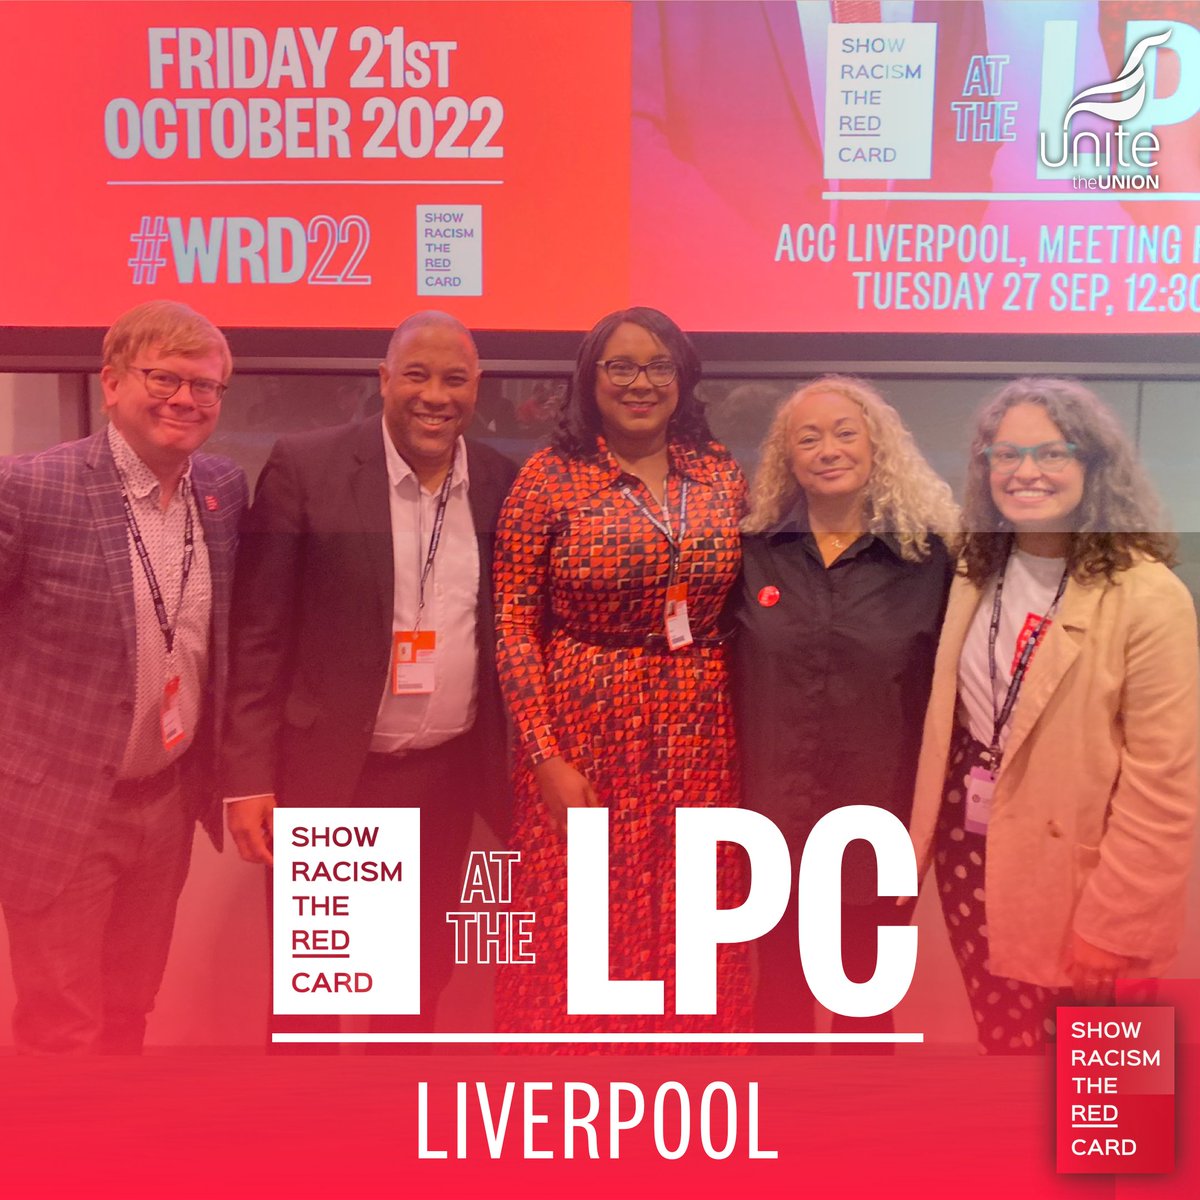 #LPC22: Thank you to all of our speakers and attendees who made our meeting at #Lab22 such a success! Strong dialogue is one of first steps towards educating against racism. #ShowRacismtheRedCard | #LabourConference2022